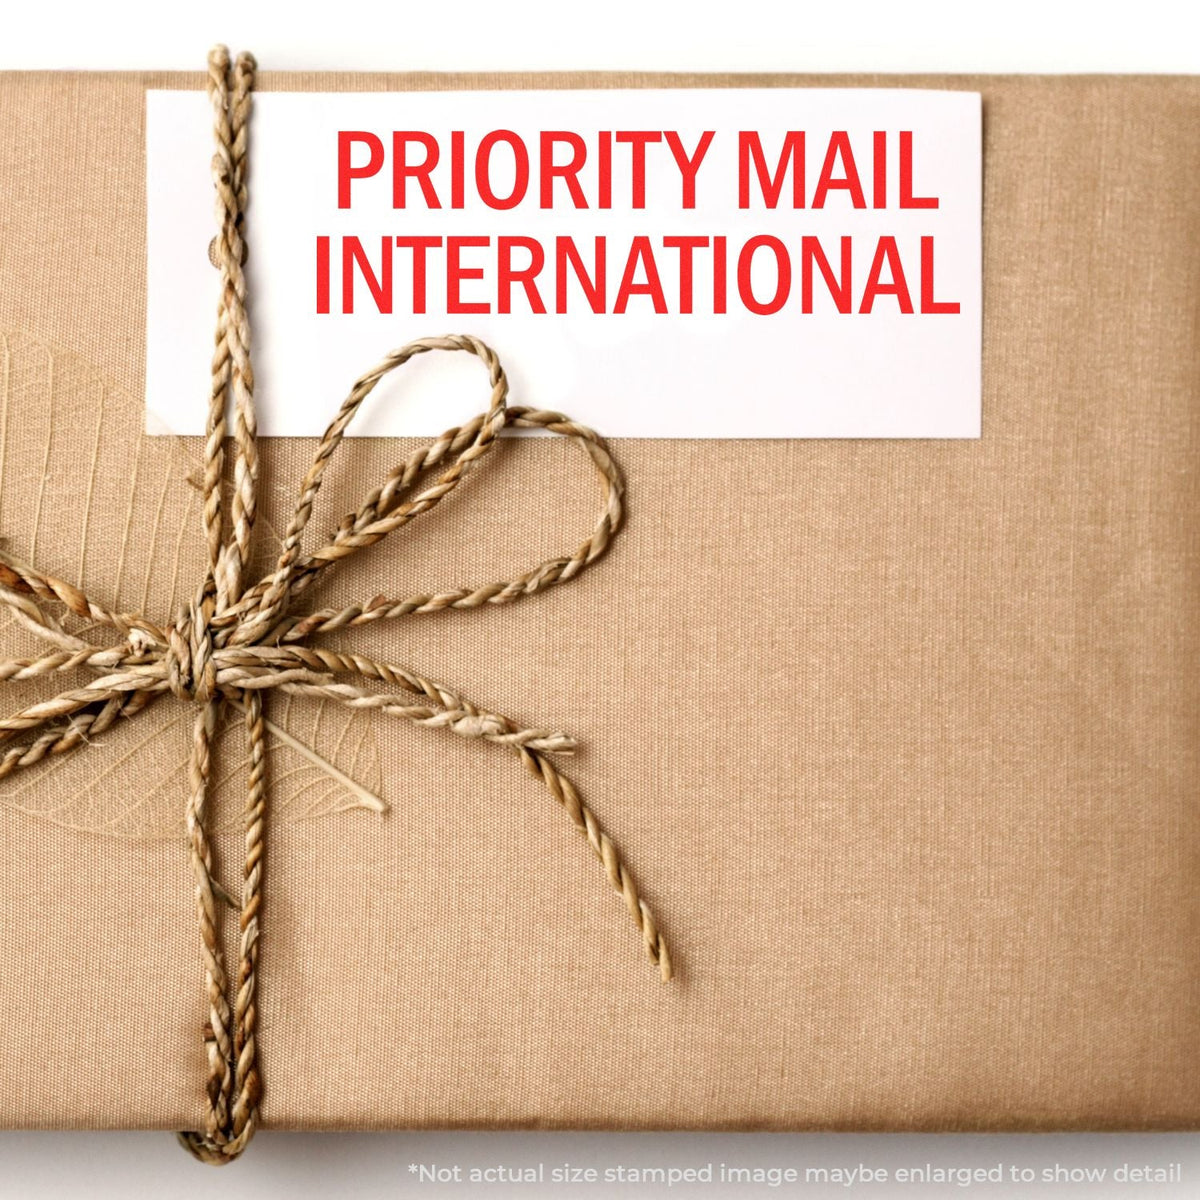 In Use Self-Inking Priority Mail International Stamp Image